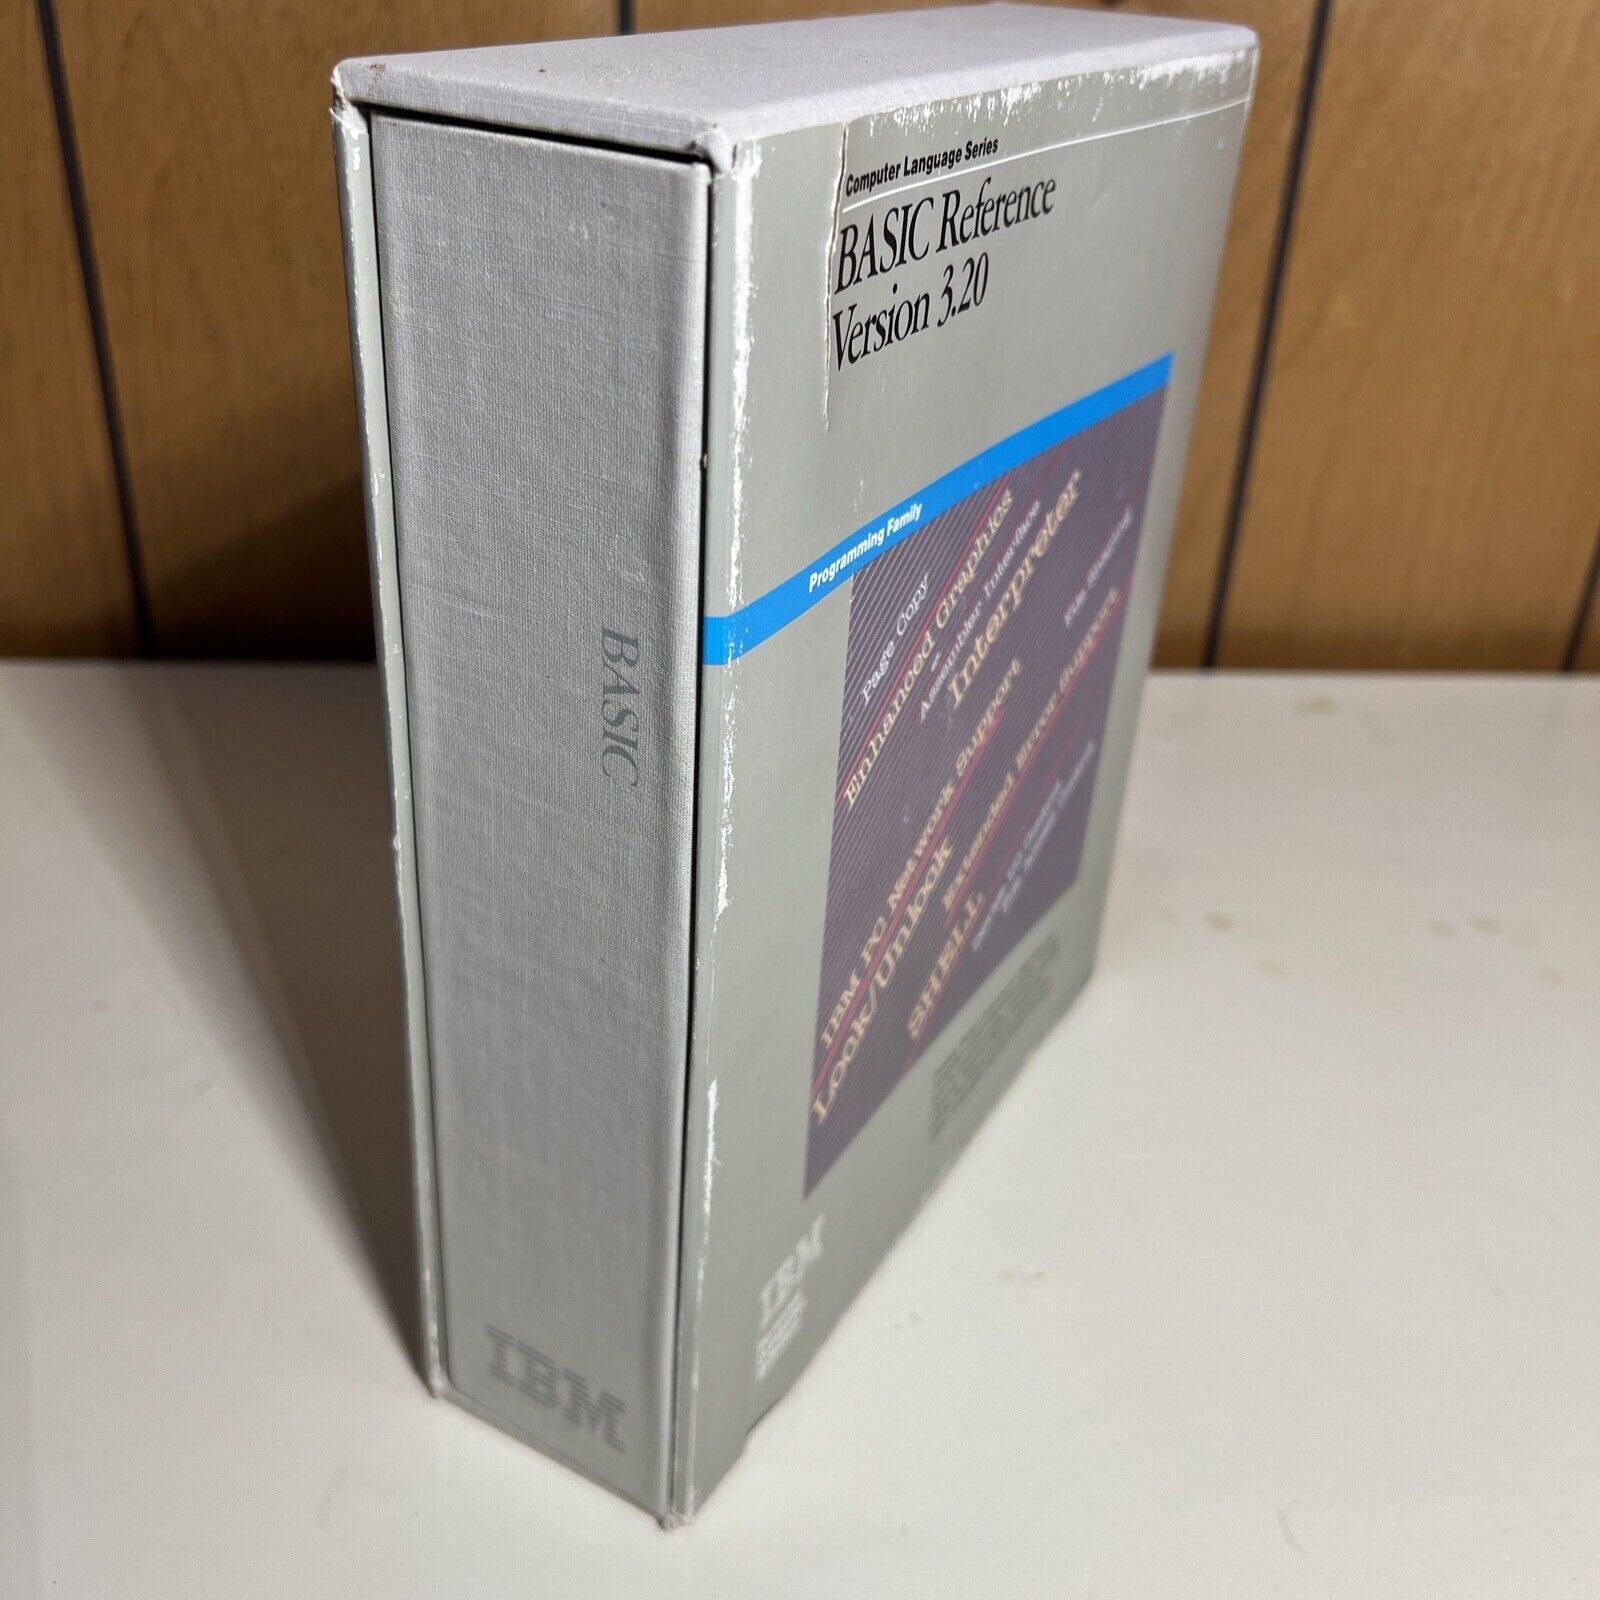 Vintage IBM Basic Reference Version 3.20 With 3 diskettes and manuals